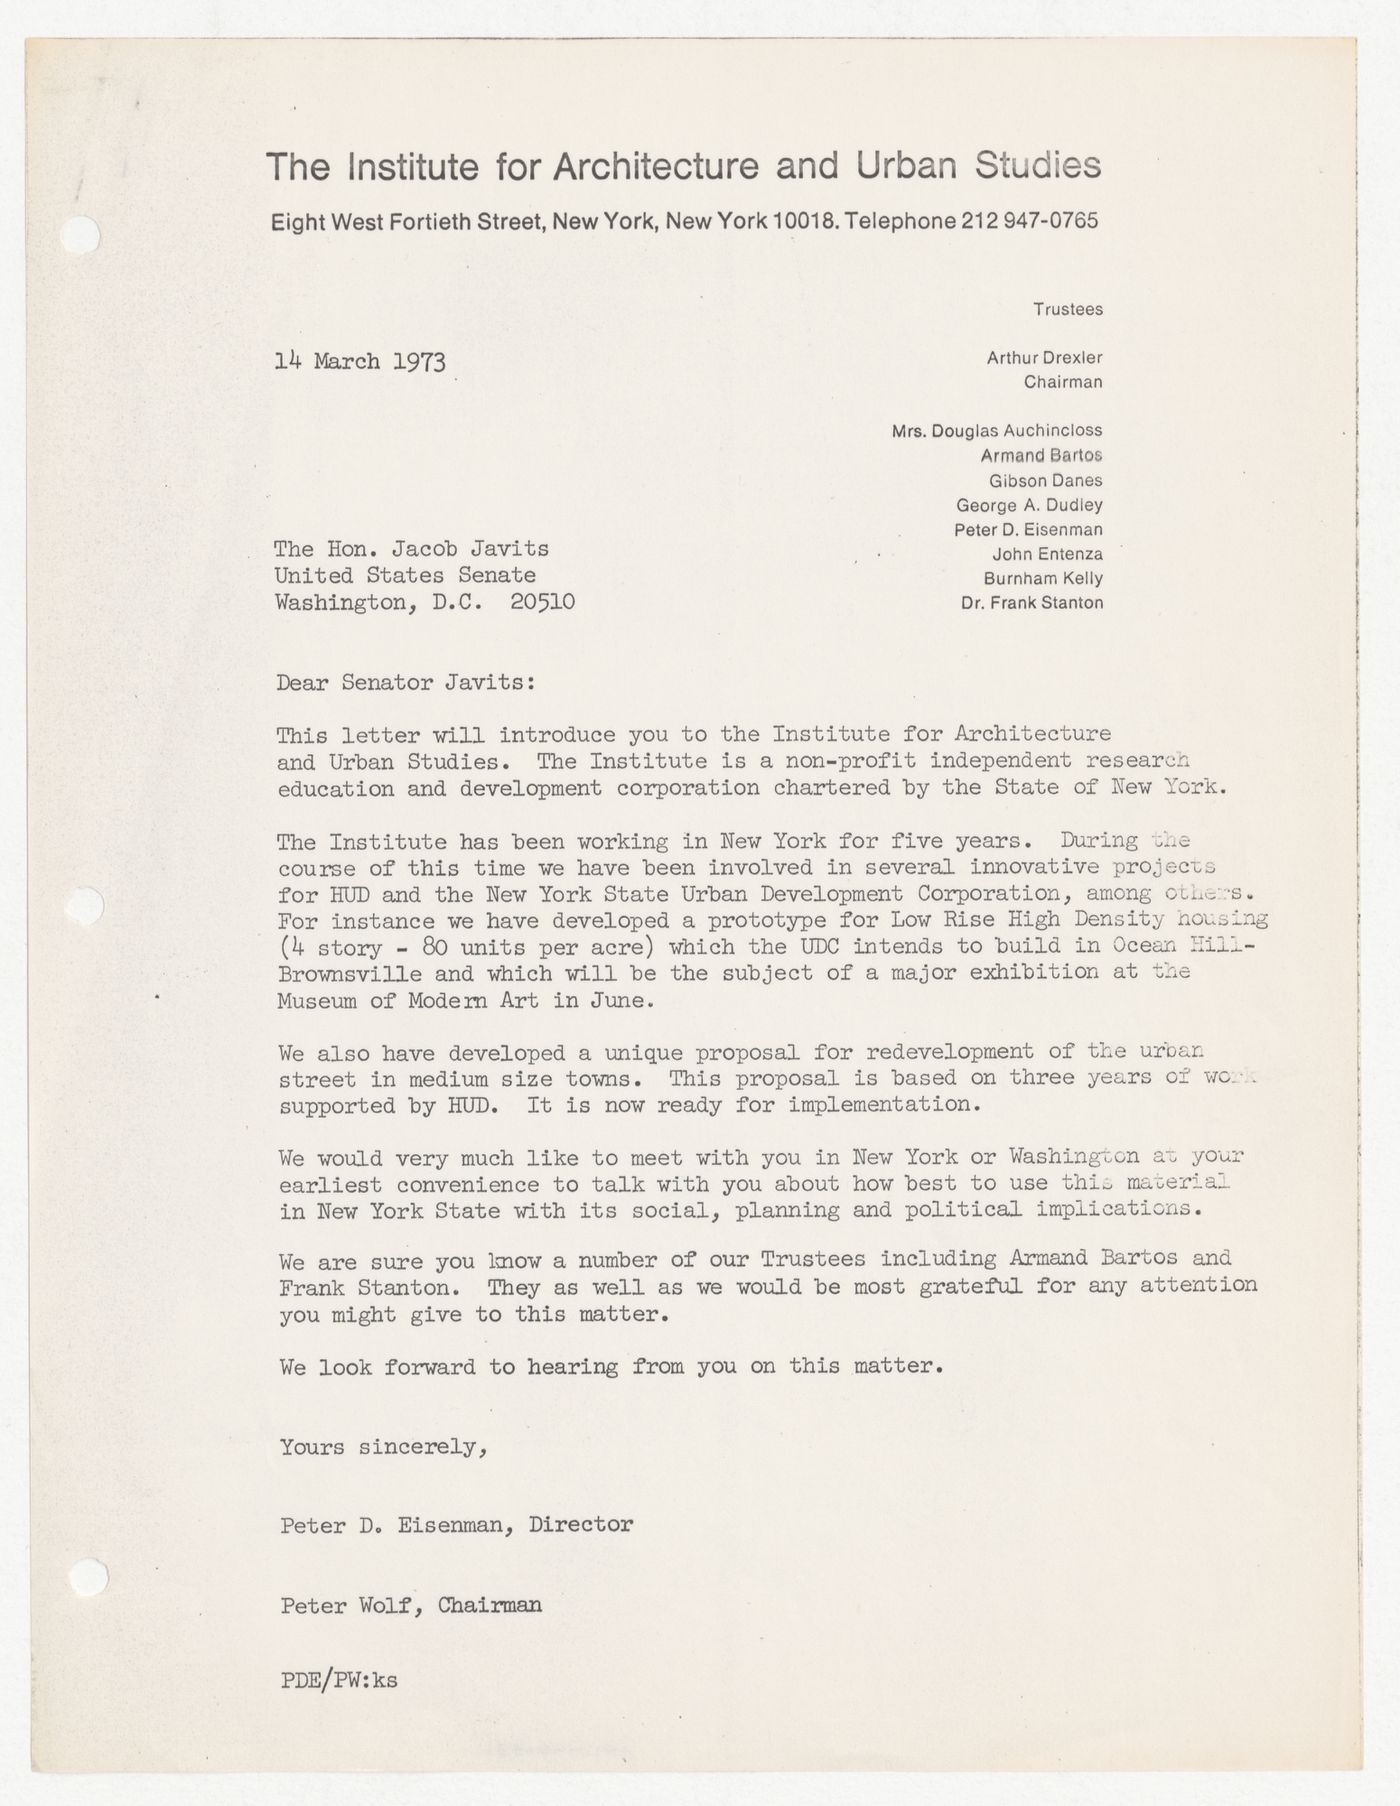 Letter from Peter D. Eisenman and Peter Wolf to Jacob Javits about possible implementation of IAUS projects